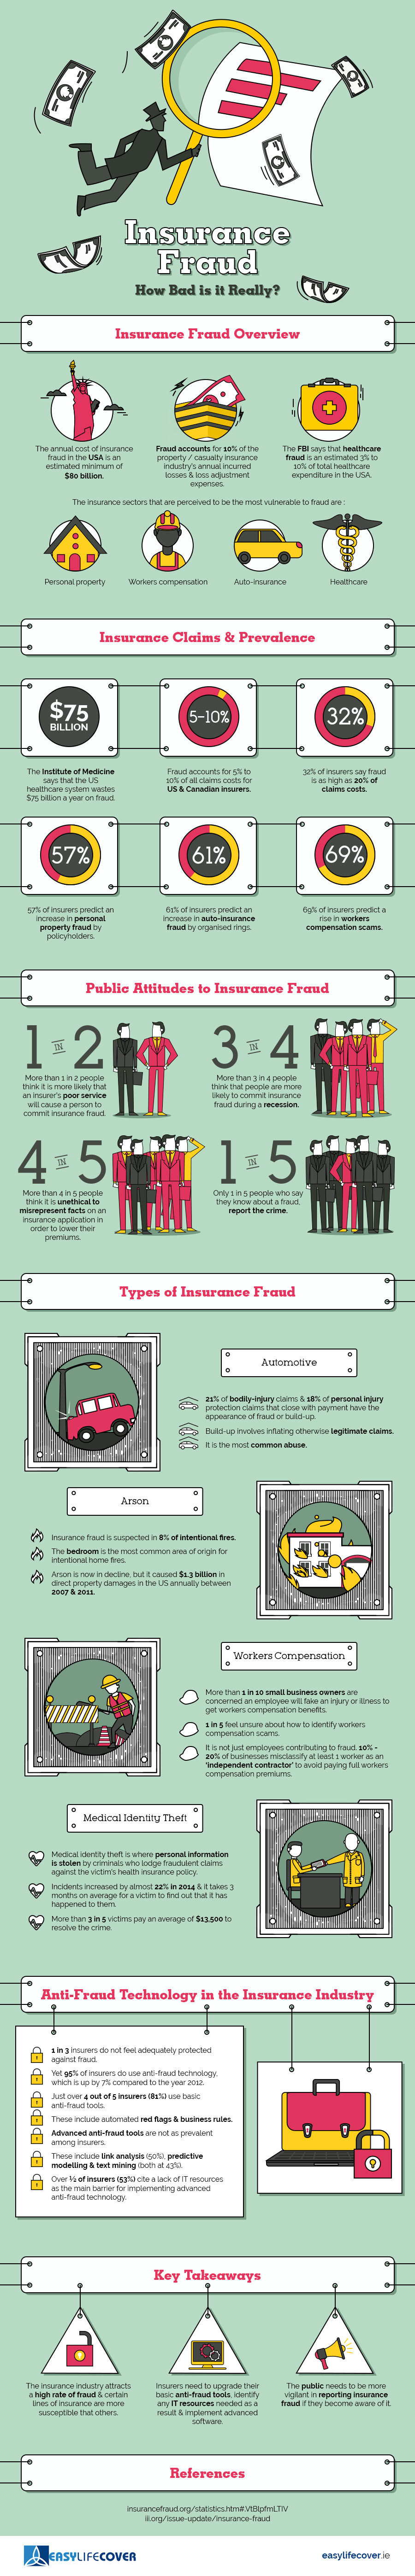 Insurance Fraud, How Bad is it Really?